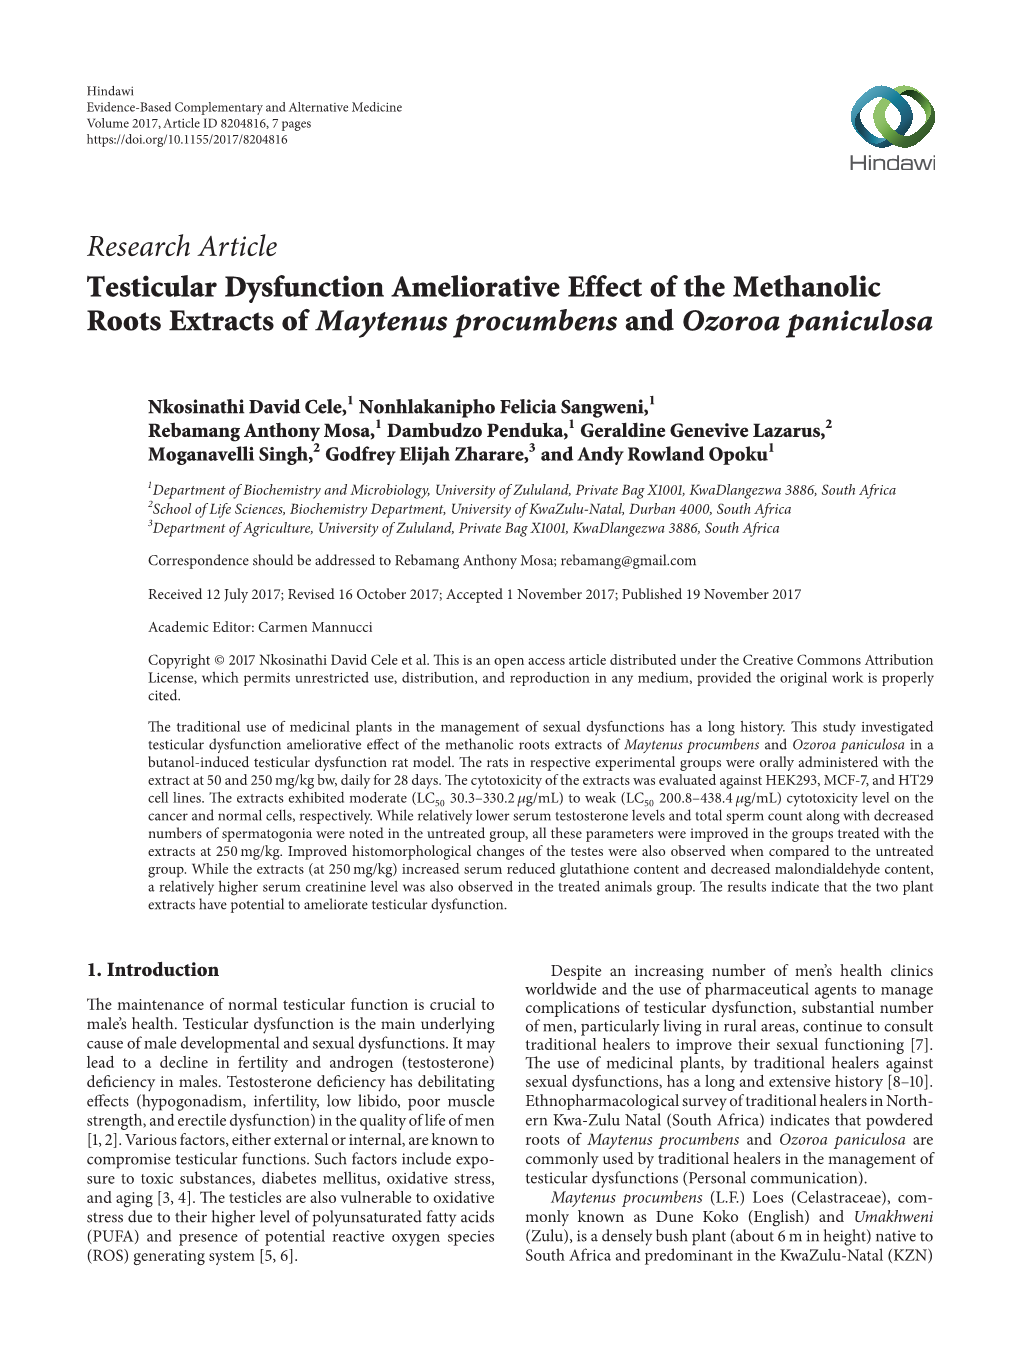 Testicular Dysfunction Ameliorative Effect of the Methanolic Roots Extracts of Maytenus Procumbens and Ozoroa Paniculosa